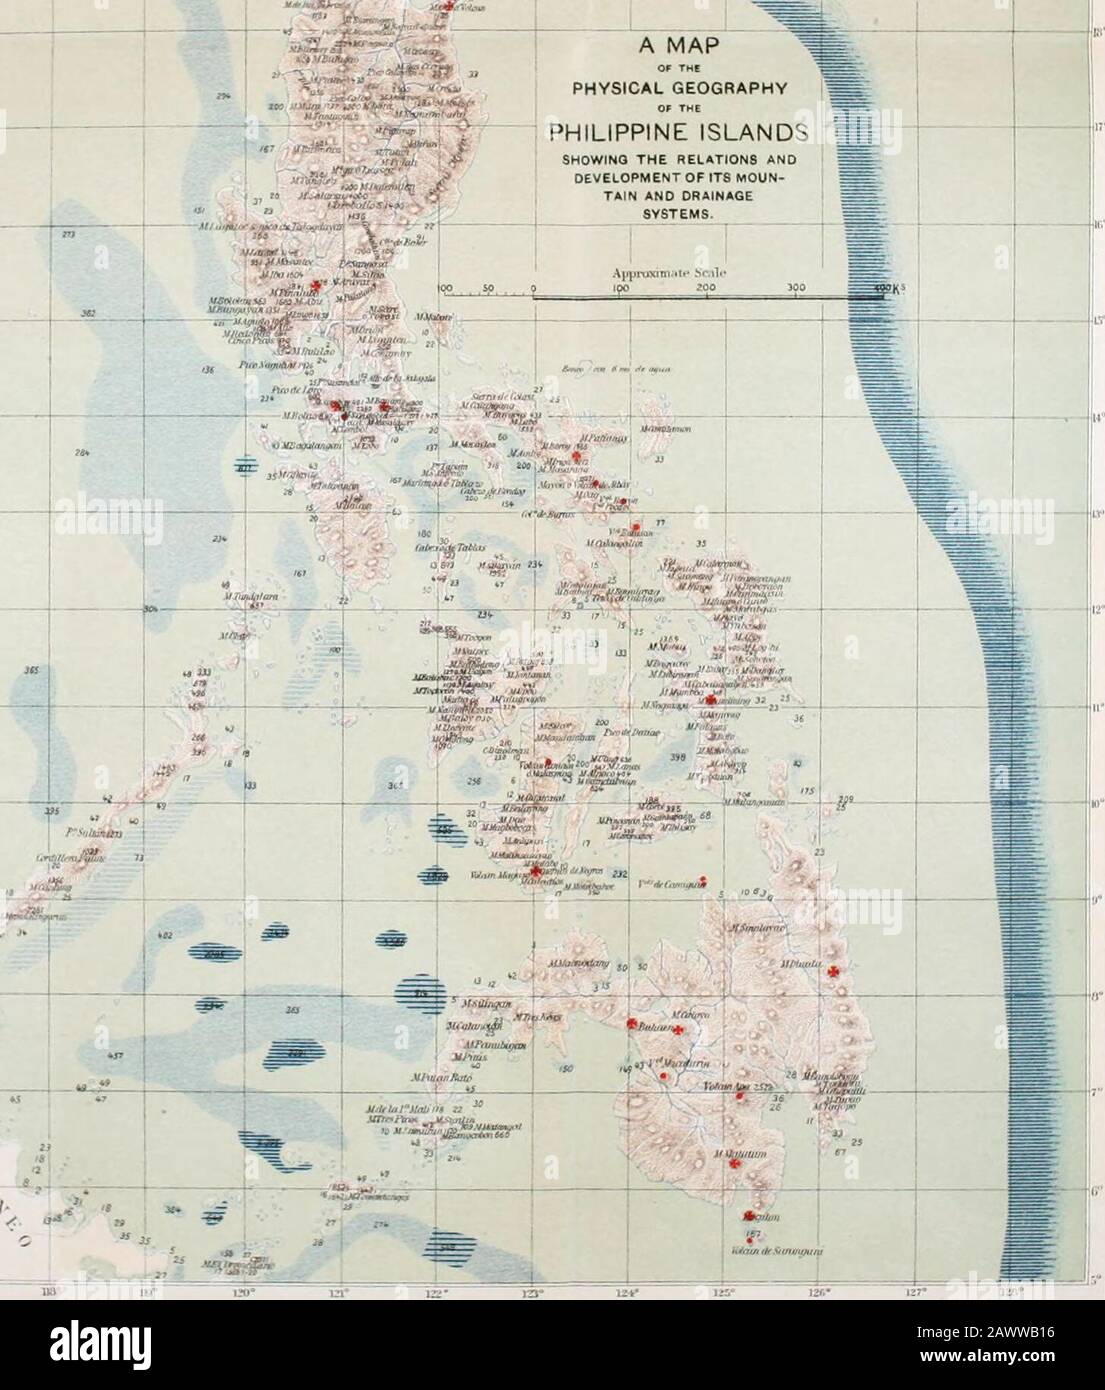 A pronouncing gazetteer and geographical dictionary of the Philippine Islands, United States of America with maps, charts and illustrations . rties being: Sulphur, at Aparri, Caga3an, Luzon, and many other localities,rivaling, according to analyses, the celebrated springs of Arkansasand Virginia in the United States, Eaux-Bonnes and Aix-la-Chapellein Prussia, and Harrowgate in England. Saline, at Mariveles, in Bataan, opposite Manila, and other points,containing salts of lime, magnesia, soda, iron, iodine, and bromine,equaling Saratoga, United States; St. Catherine, Canada; Kissingenin Bavaria Stock Photo